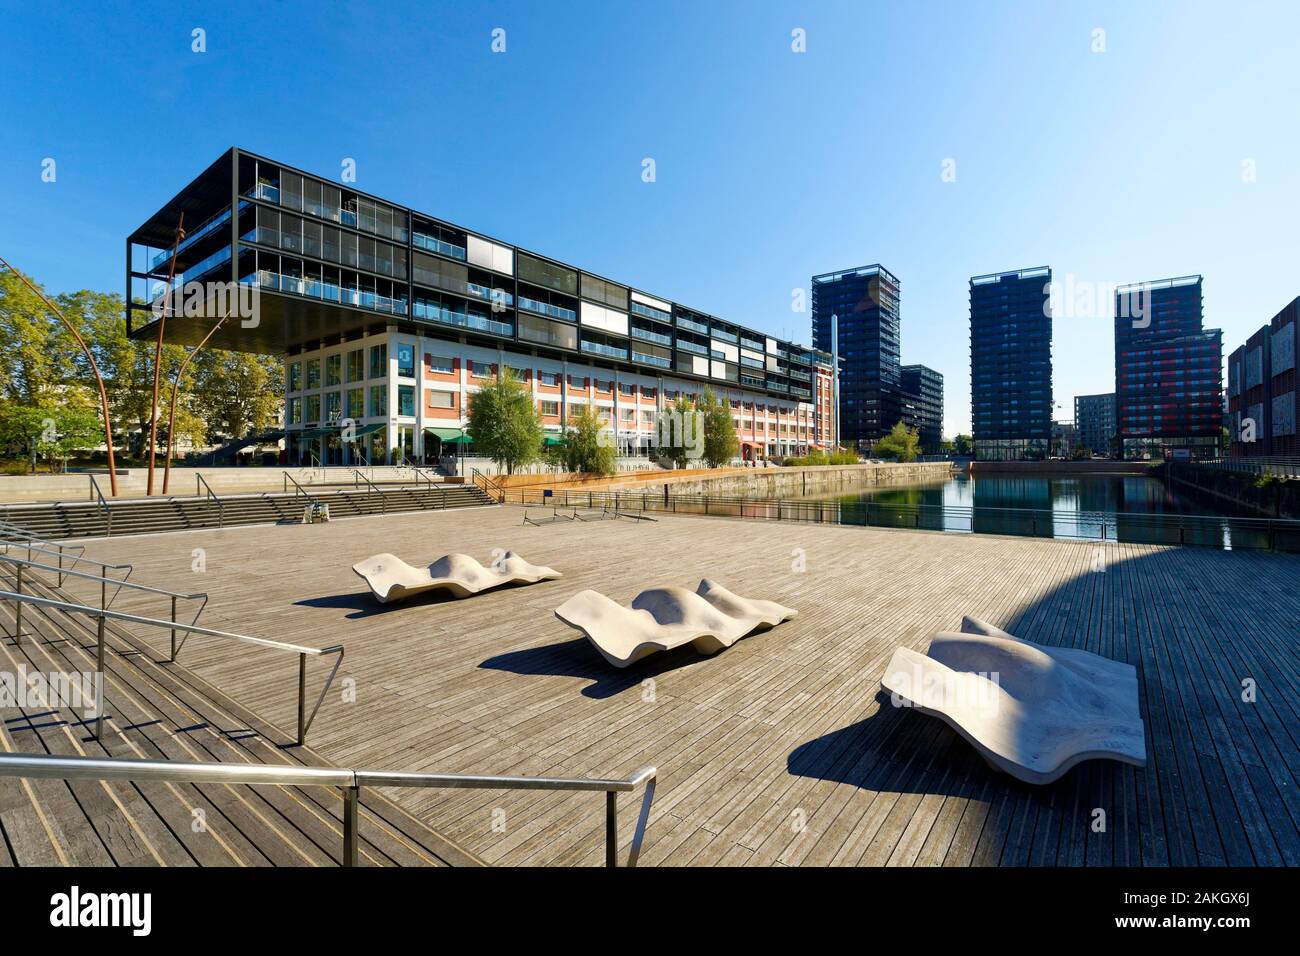 France, Bas Rhin, Strasbourg, development of port du Rhin (Rhine's harbour)  and conversion of breakwater of Bassin d'Austerlitz, rehabilitation of the  Seegmuller warehouse in offices, shops and accommodation by the agency  Heintz-Kehr